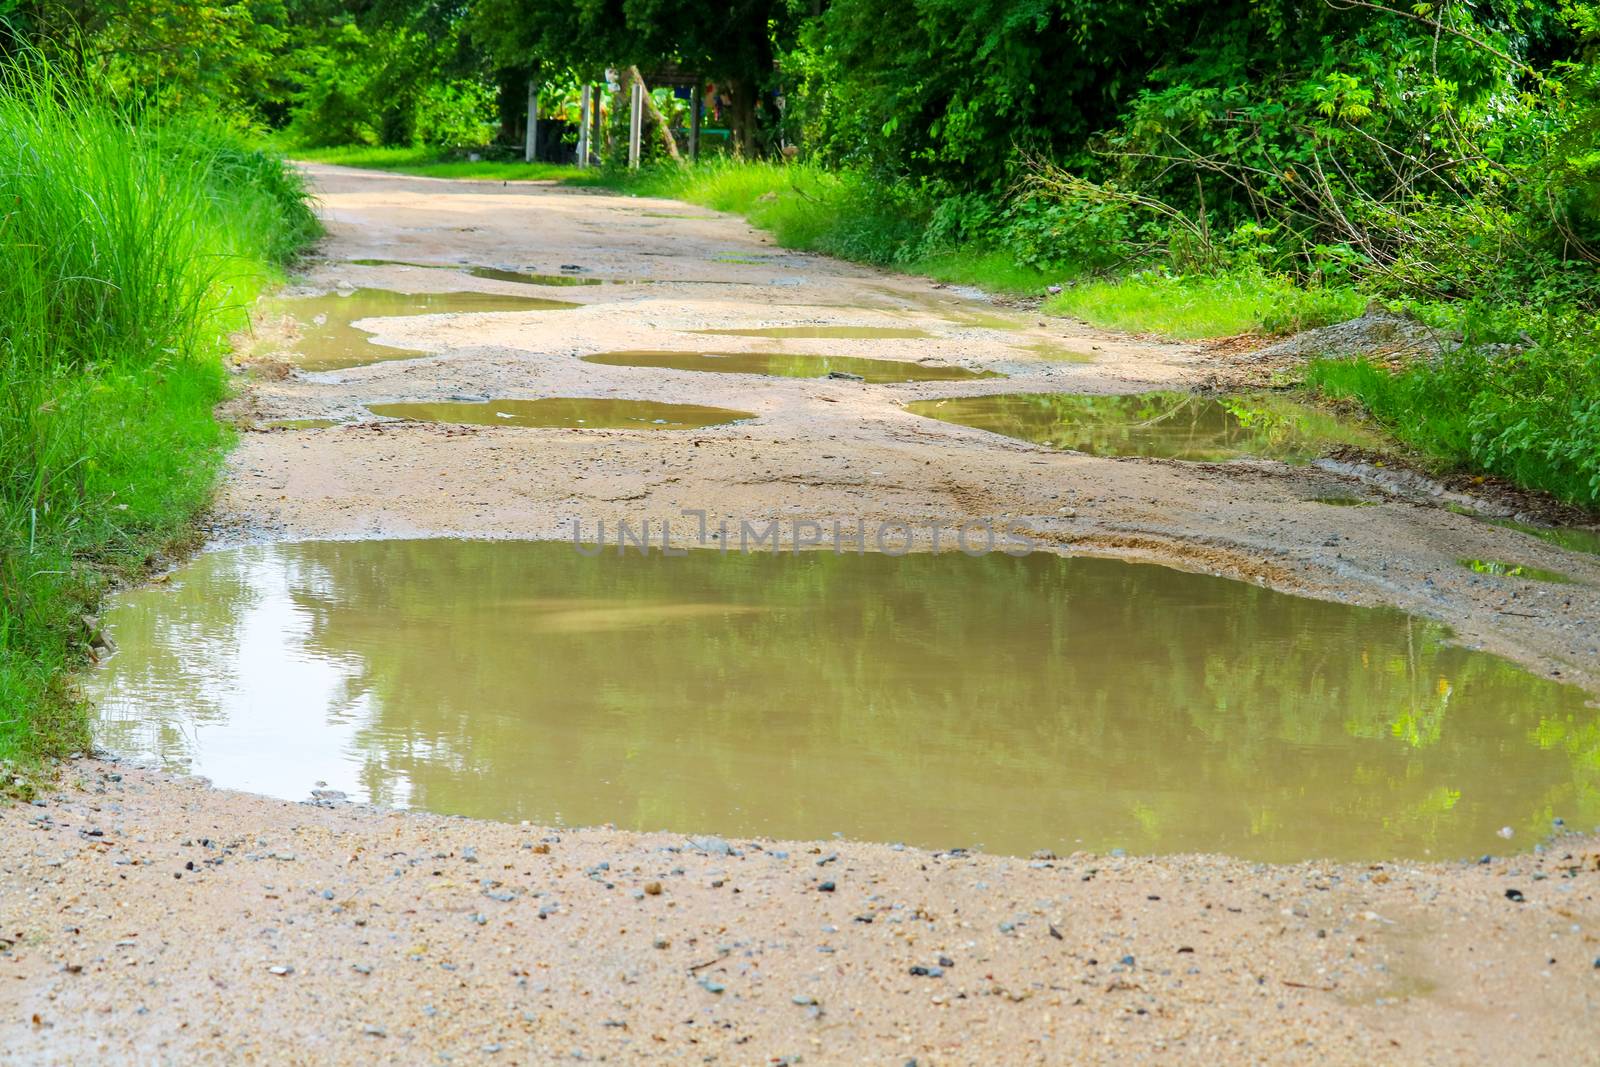 Rural dirt roads are flooded during the rainy season, the inconvenience of bumpy travel